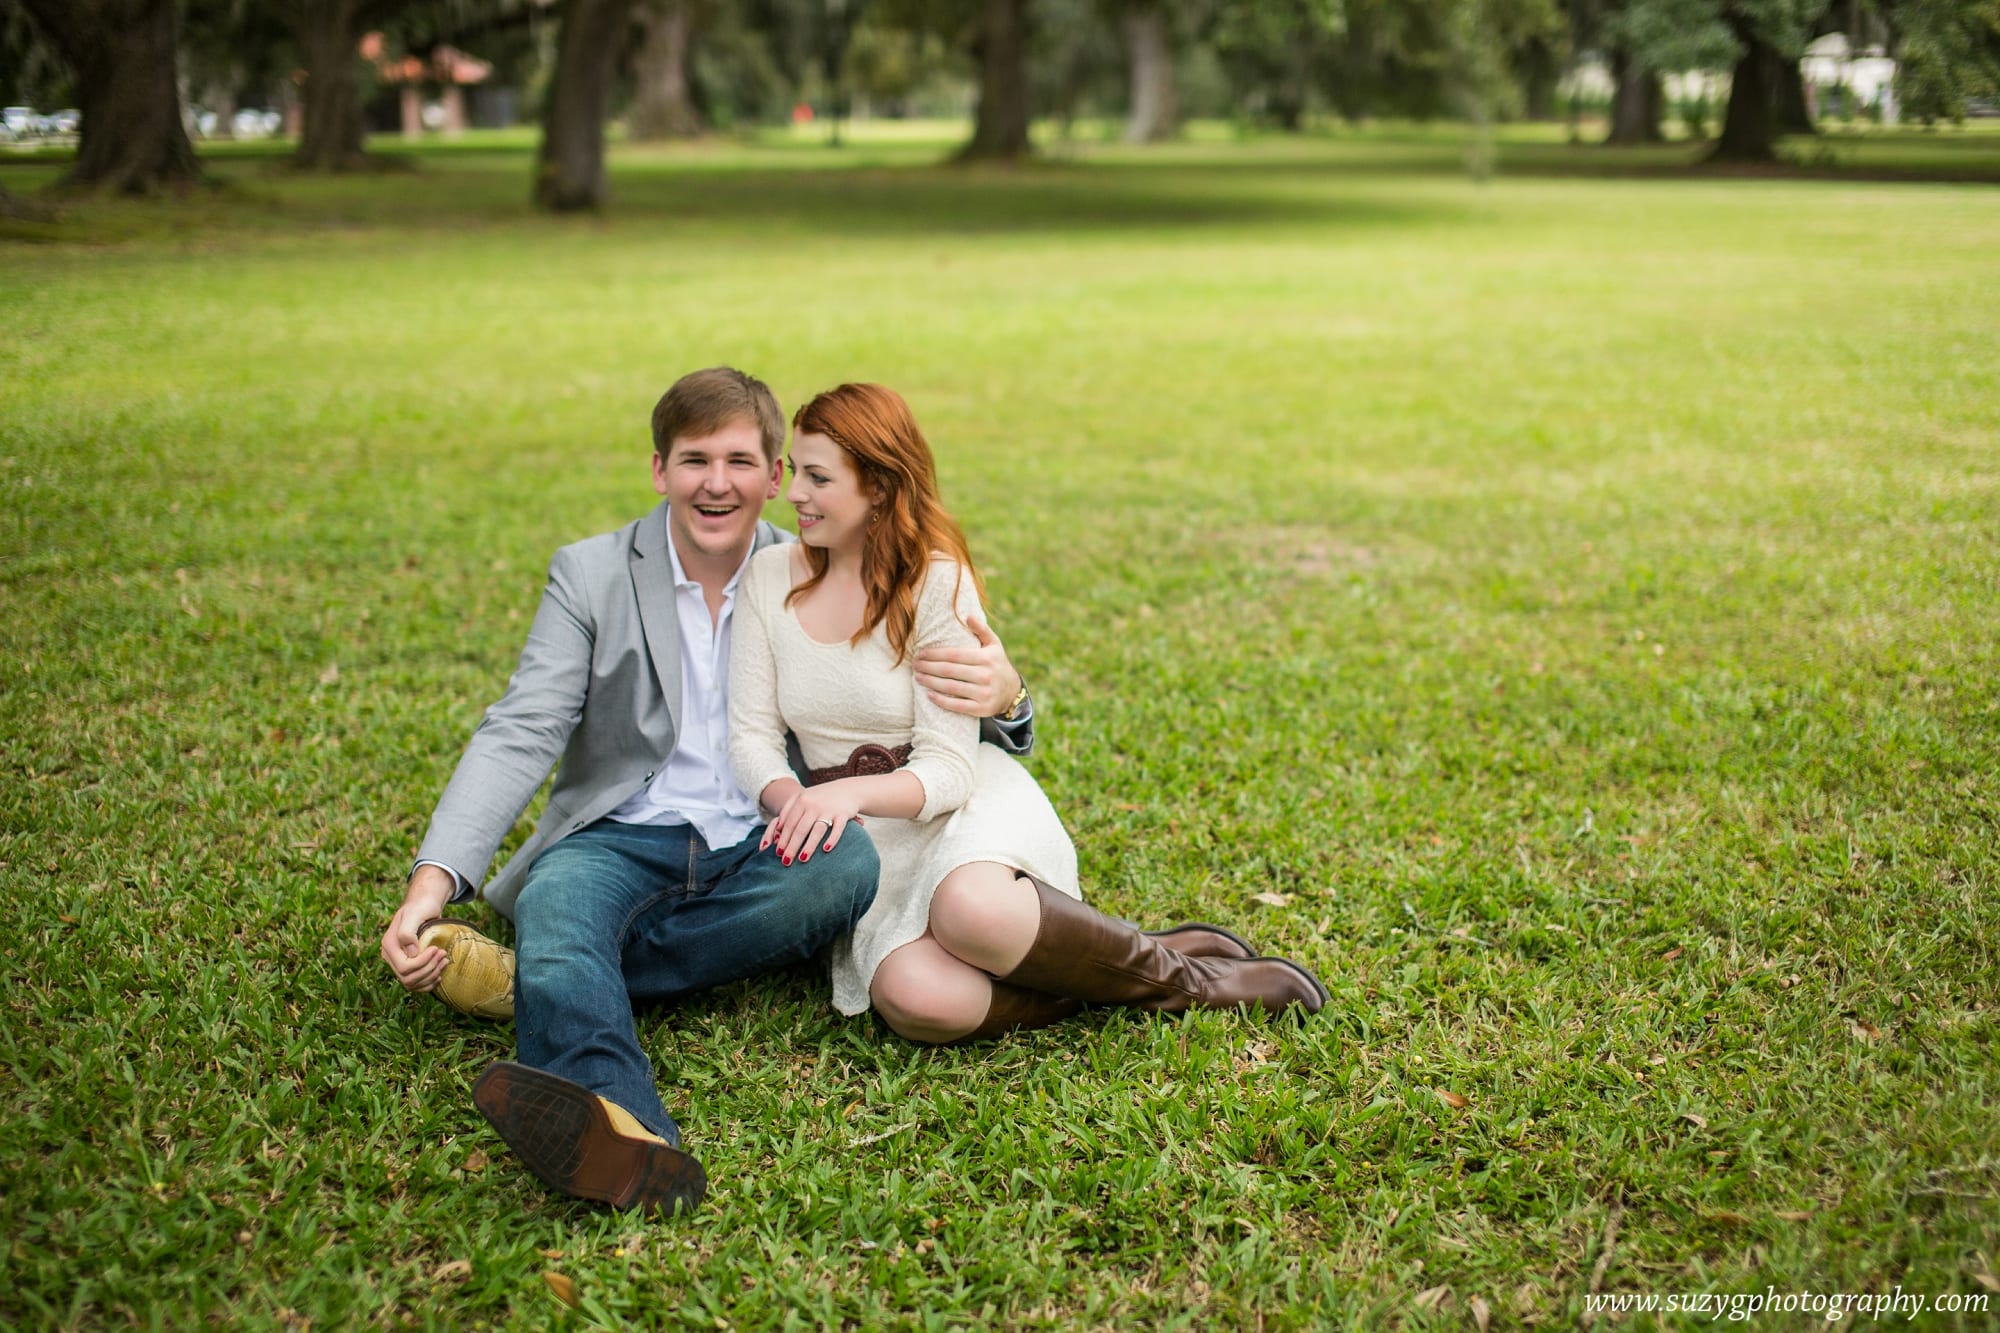 engagements-new orleans-texas-baton rouge-lake charles-suzy g-photography-suzygphotography_0133